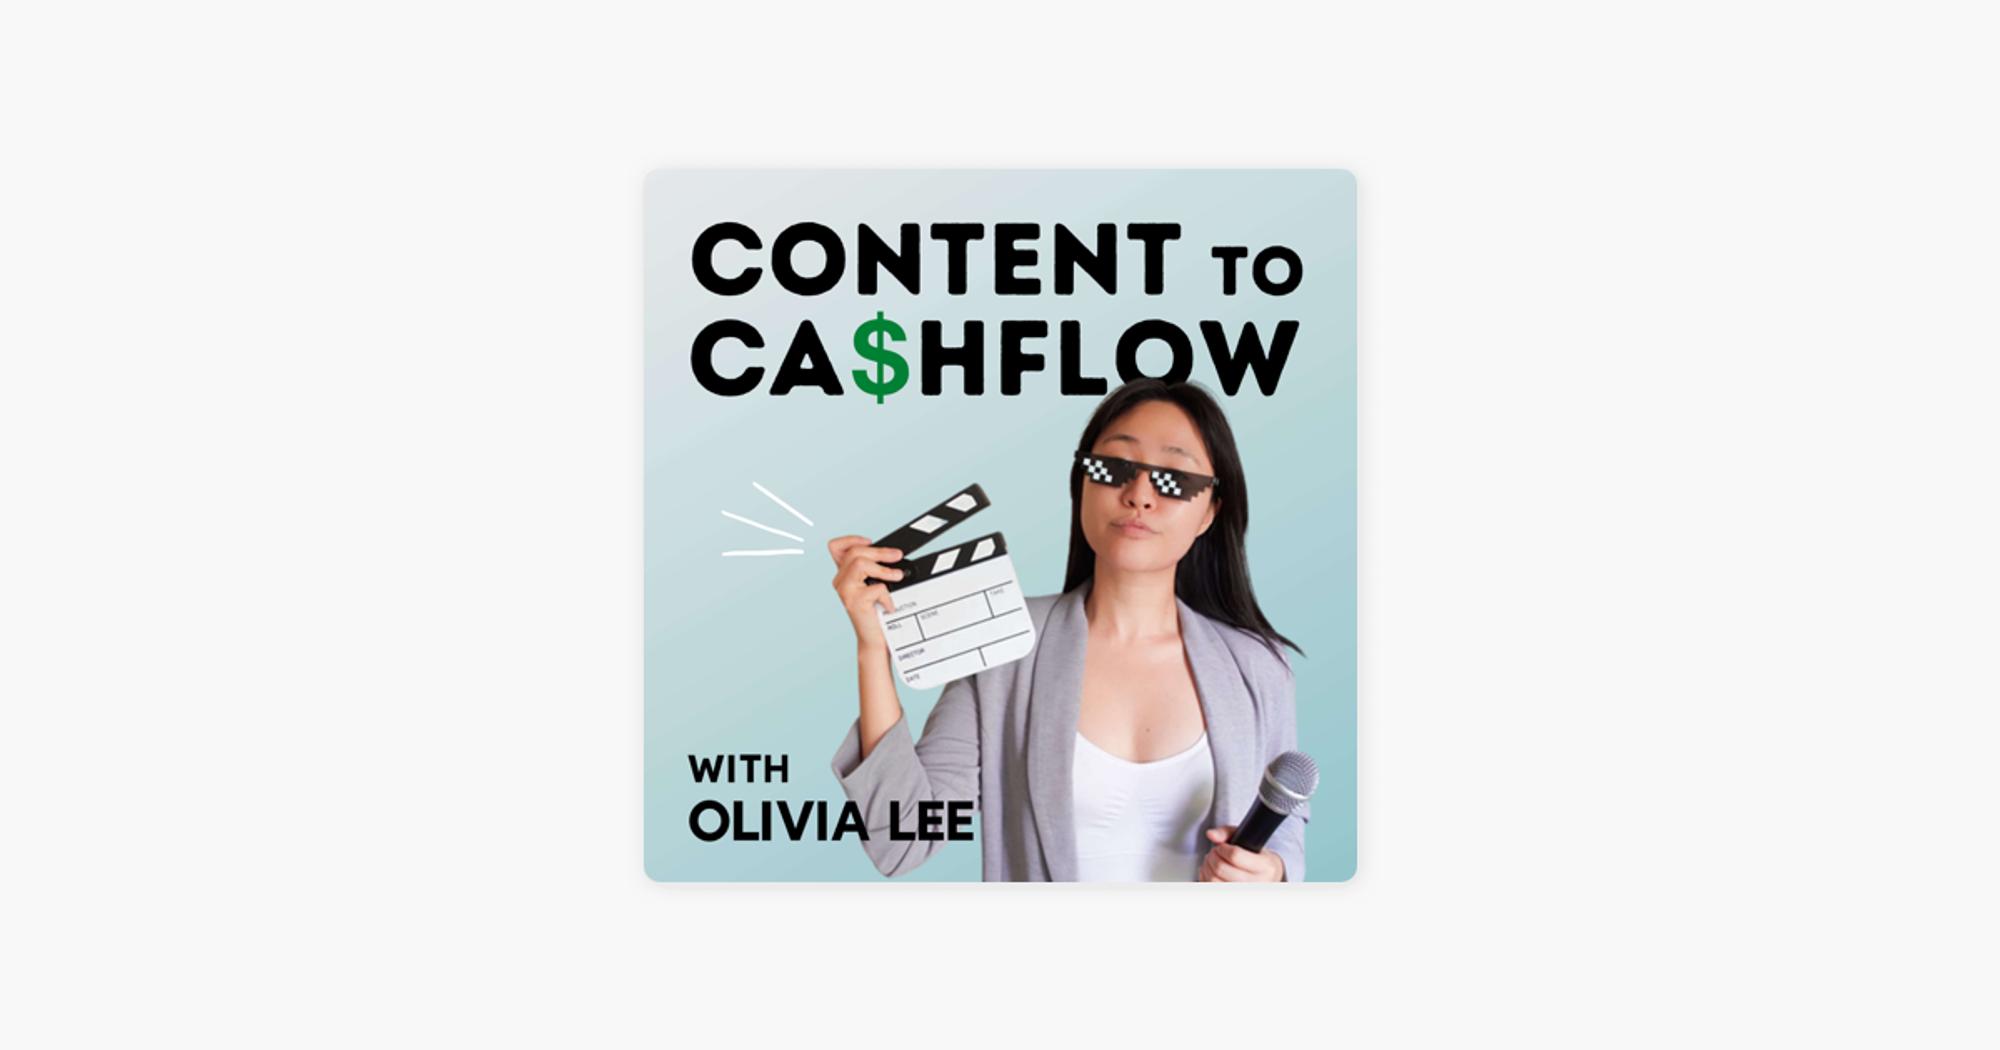 ‎Content to Cashflow: CTC 013 - How to Build a Brand From Zero with Virtual Summits (Kenneth Choo) on Apple Podcasts